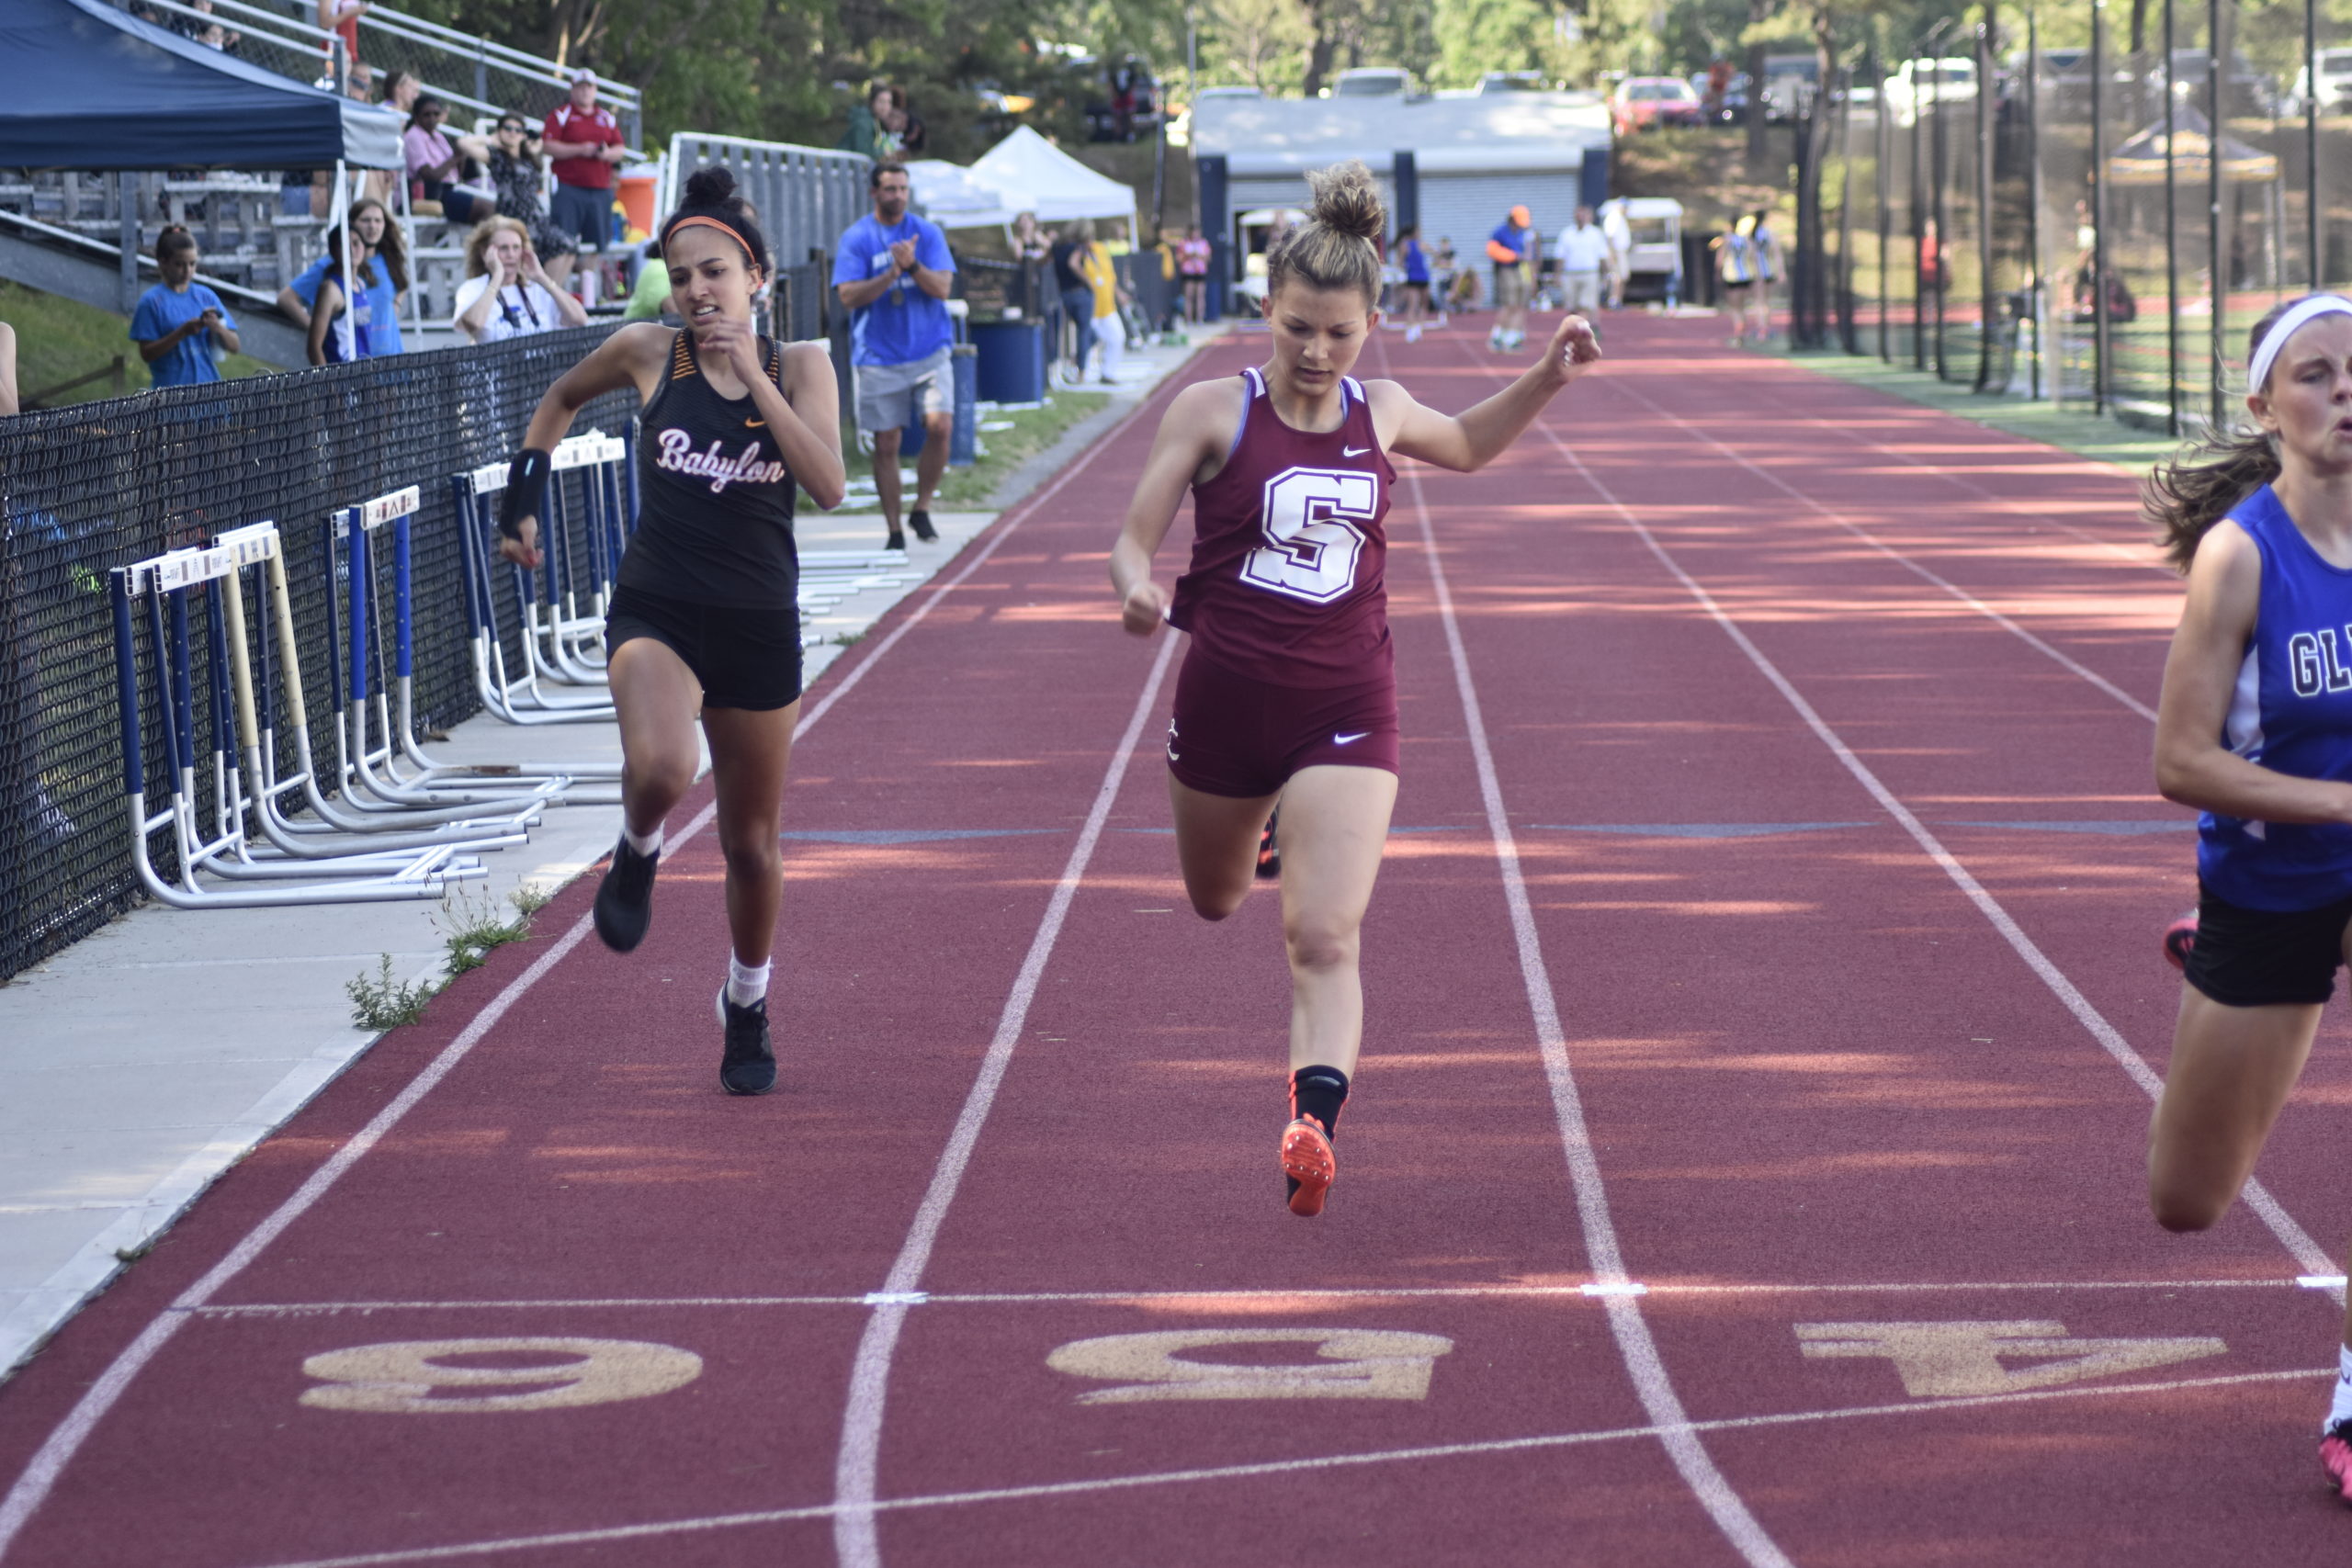 Southampton junior Gabriella Arnold placed fifth in the Division IV 100-meter dash on Thursday, June 10.